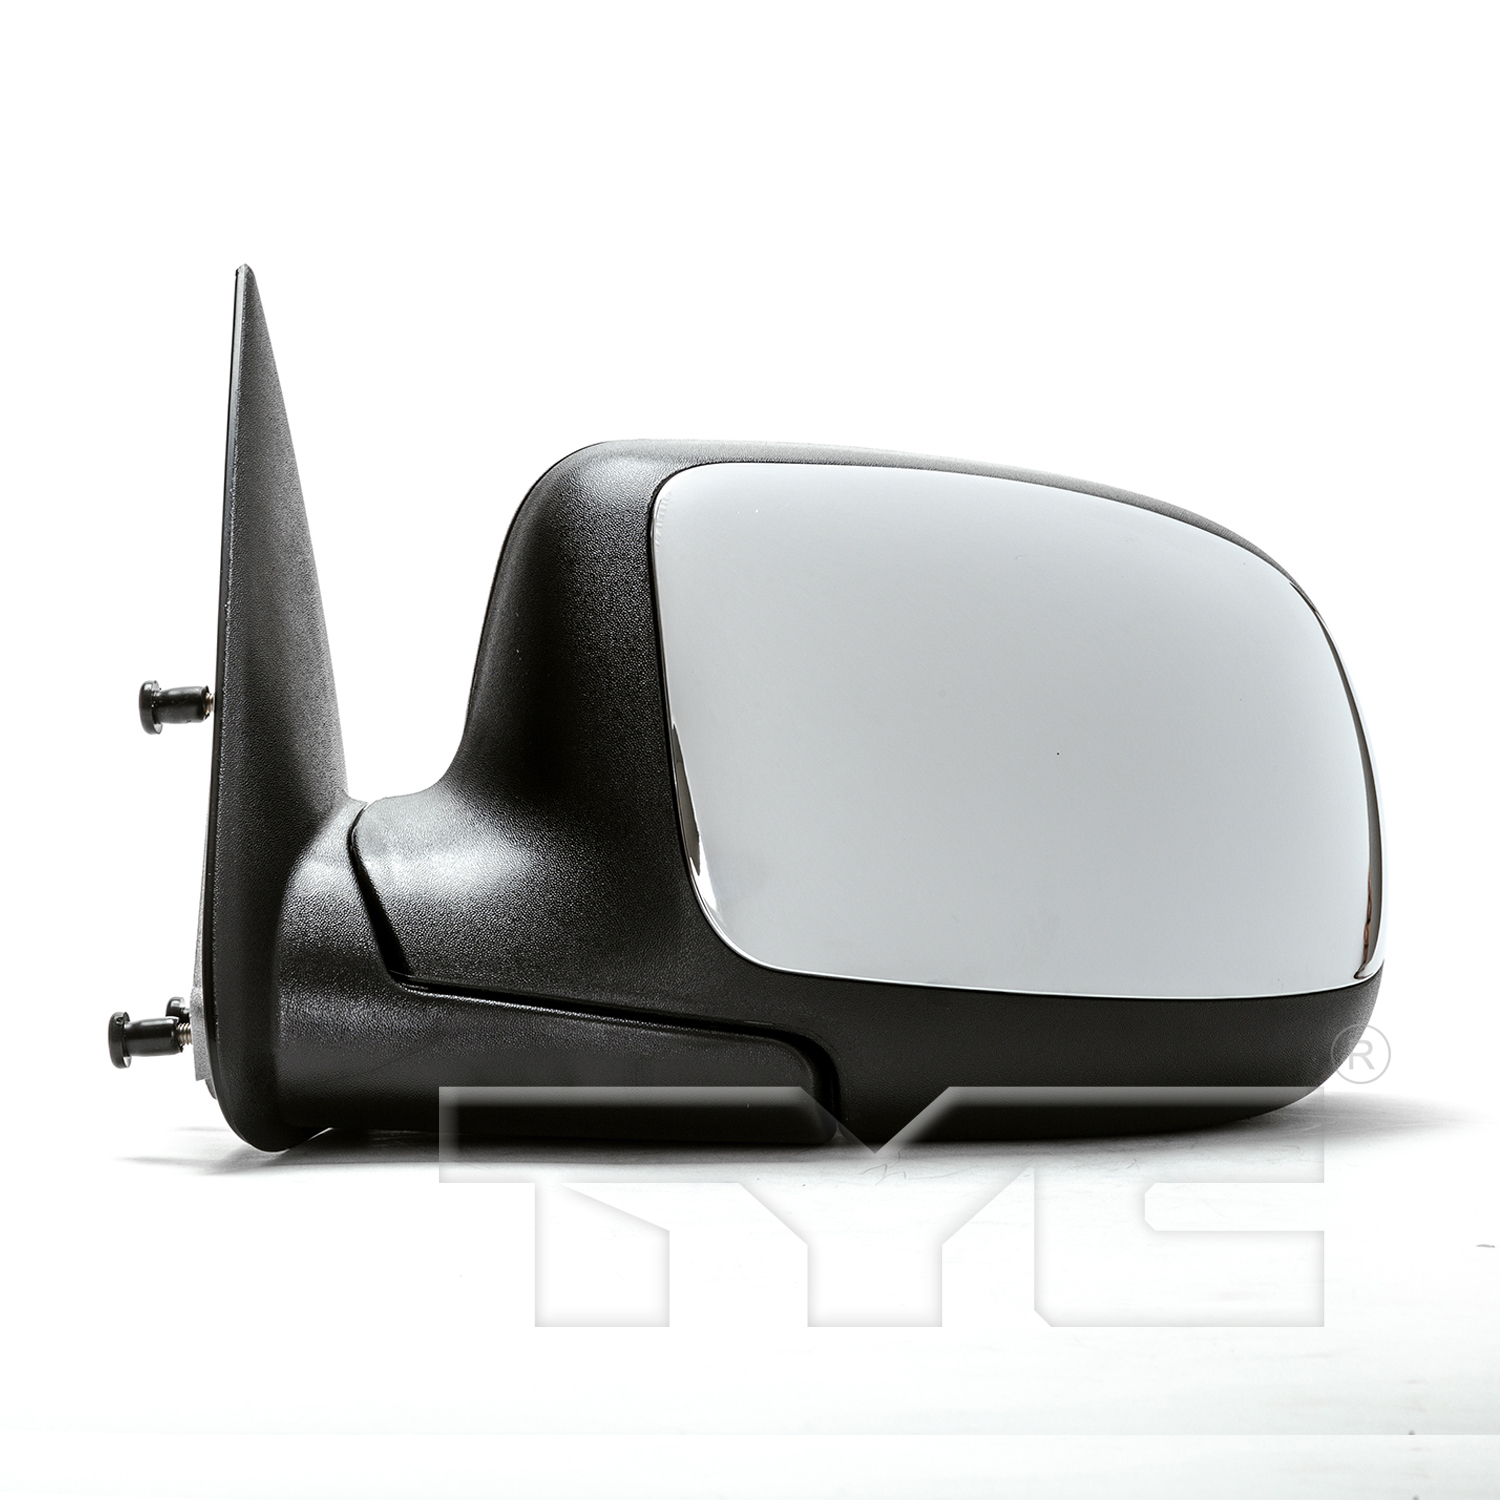 Aftermarket MIRRORS for CHEVROLET - SUBURBAN 2500, SUBURBAN 2500,00-05,LT Mirror outside rear view